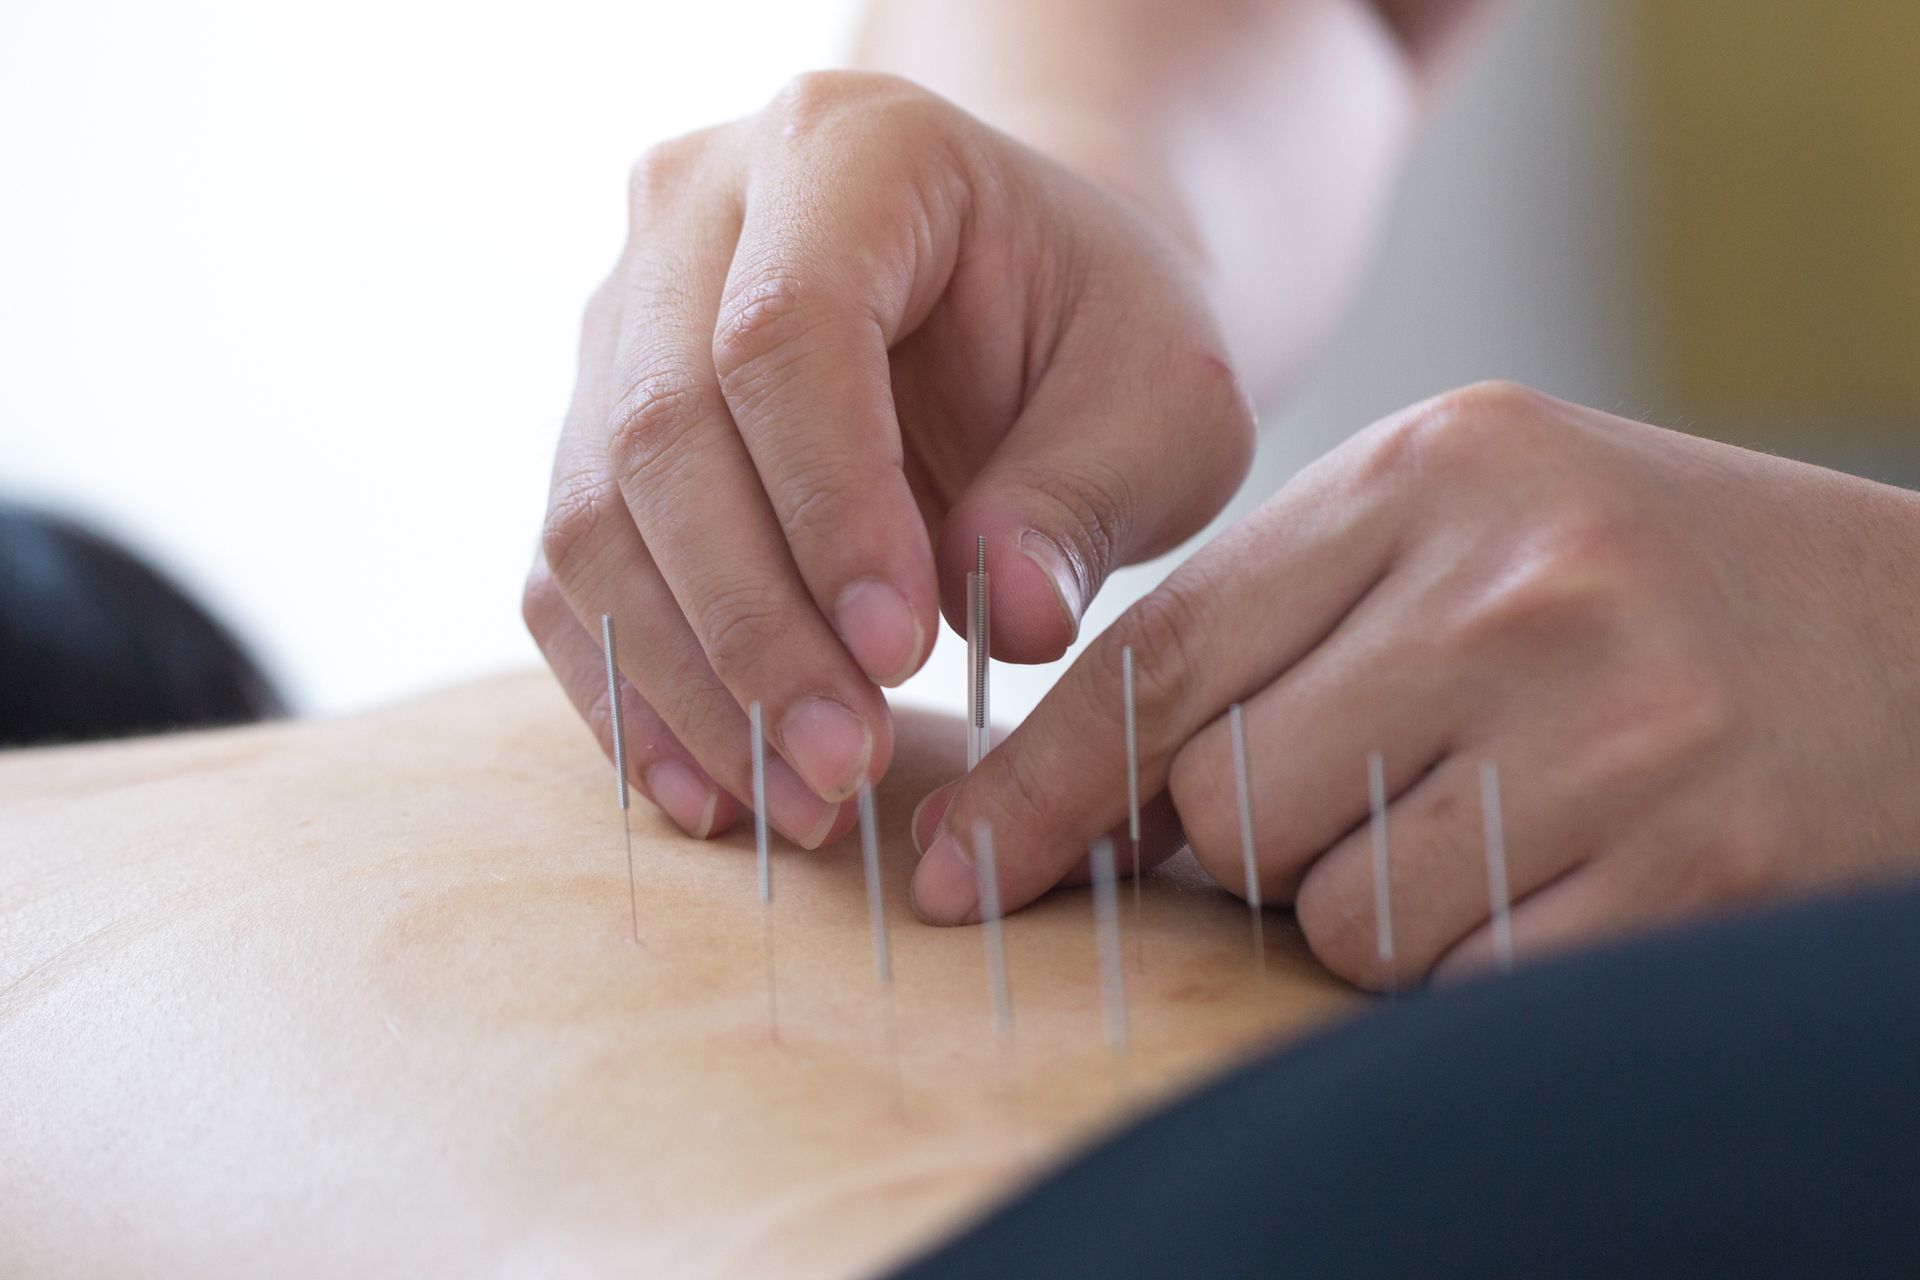 Acupuncture Treatment | Maumee, OH | Heatherdowns Chiropractic Wellness